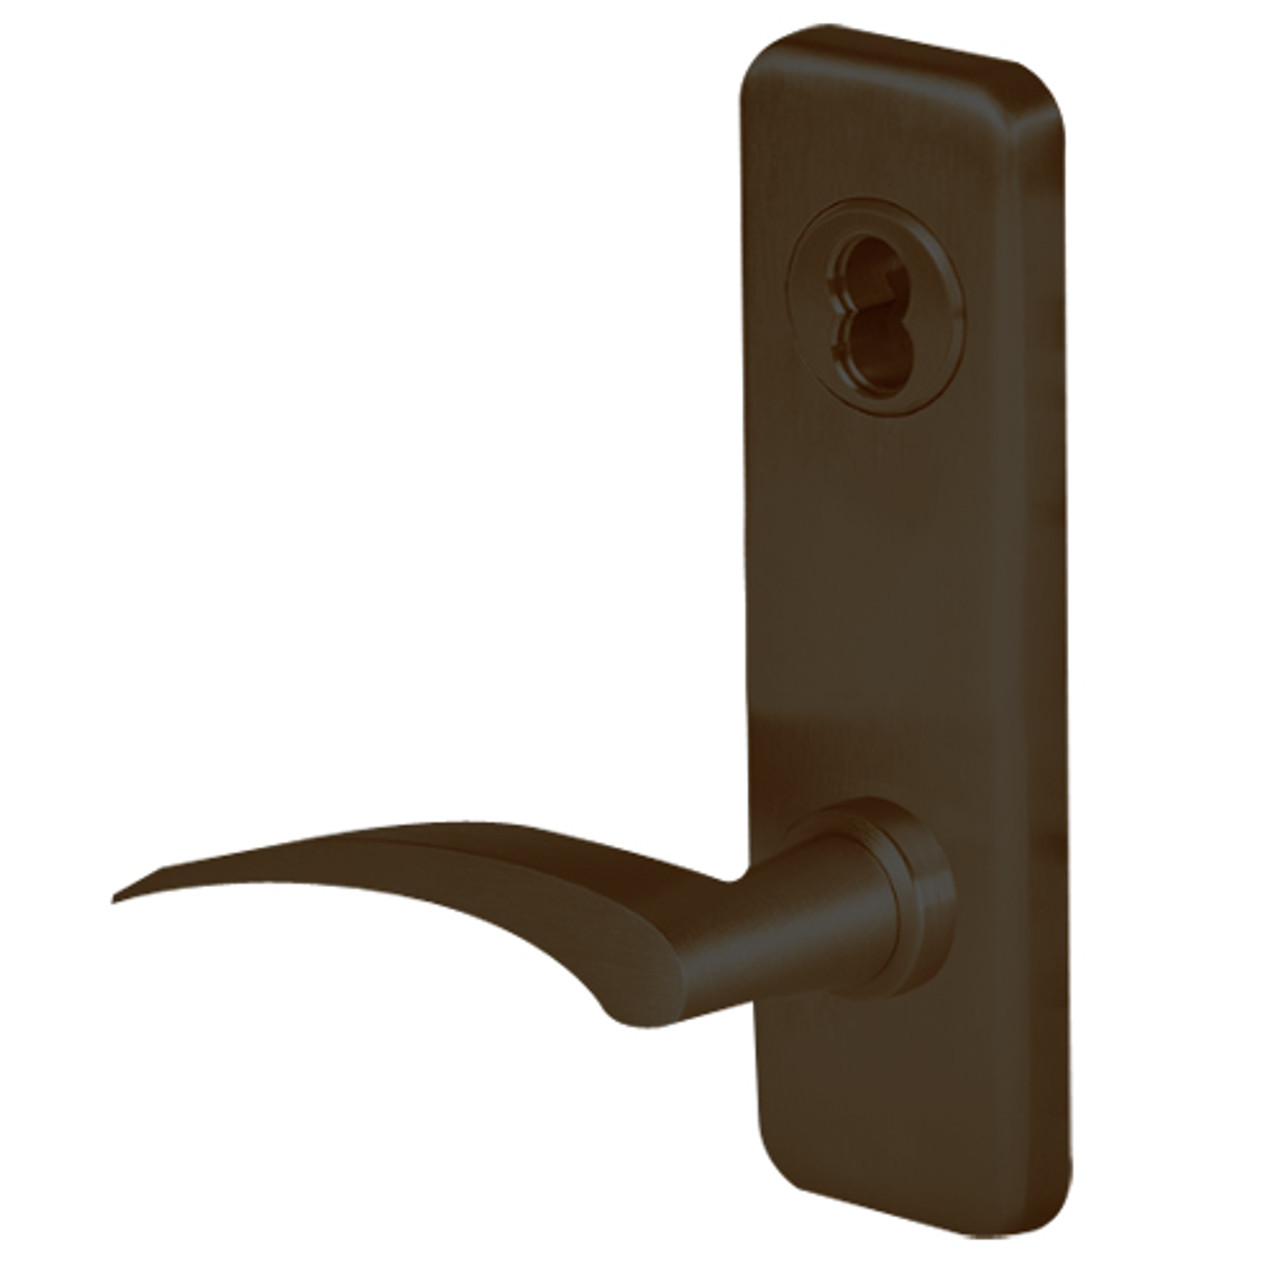 45H7HJ17RJ613 Best 40H Series Hotel with Deadbolt Heavy Duty Mortise Lever Lock with Gull Wing RH in Oil Rubbed Bronze